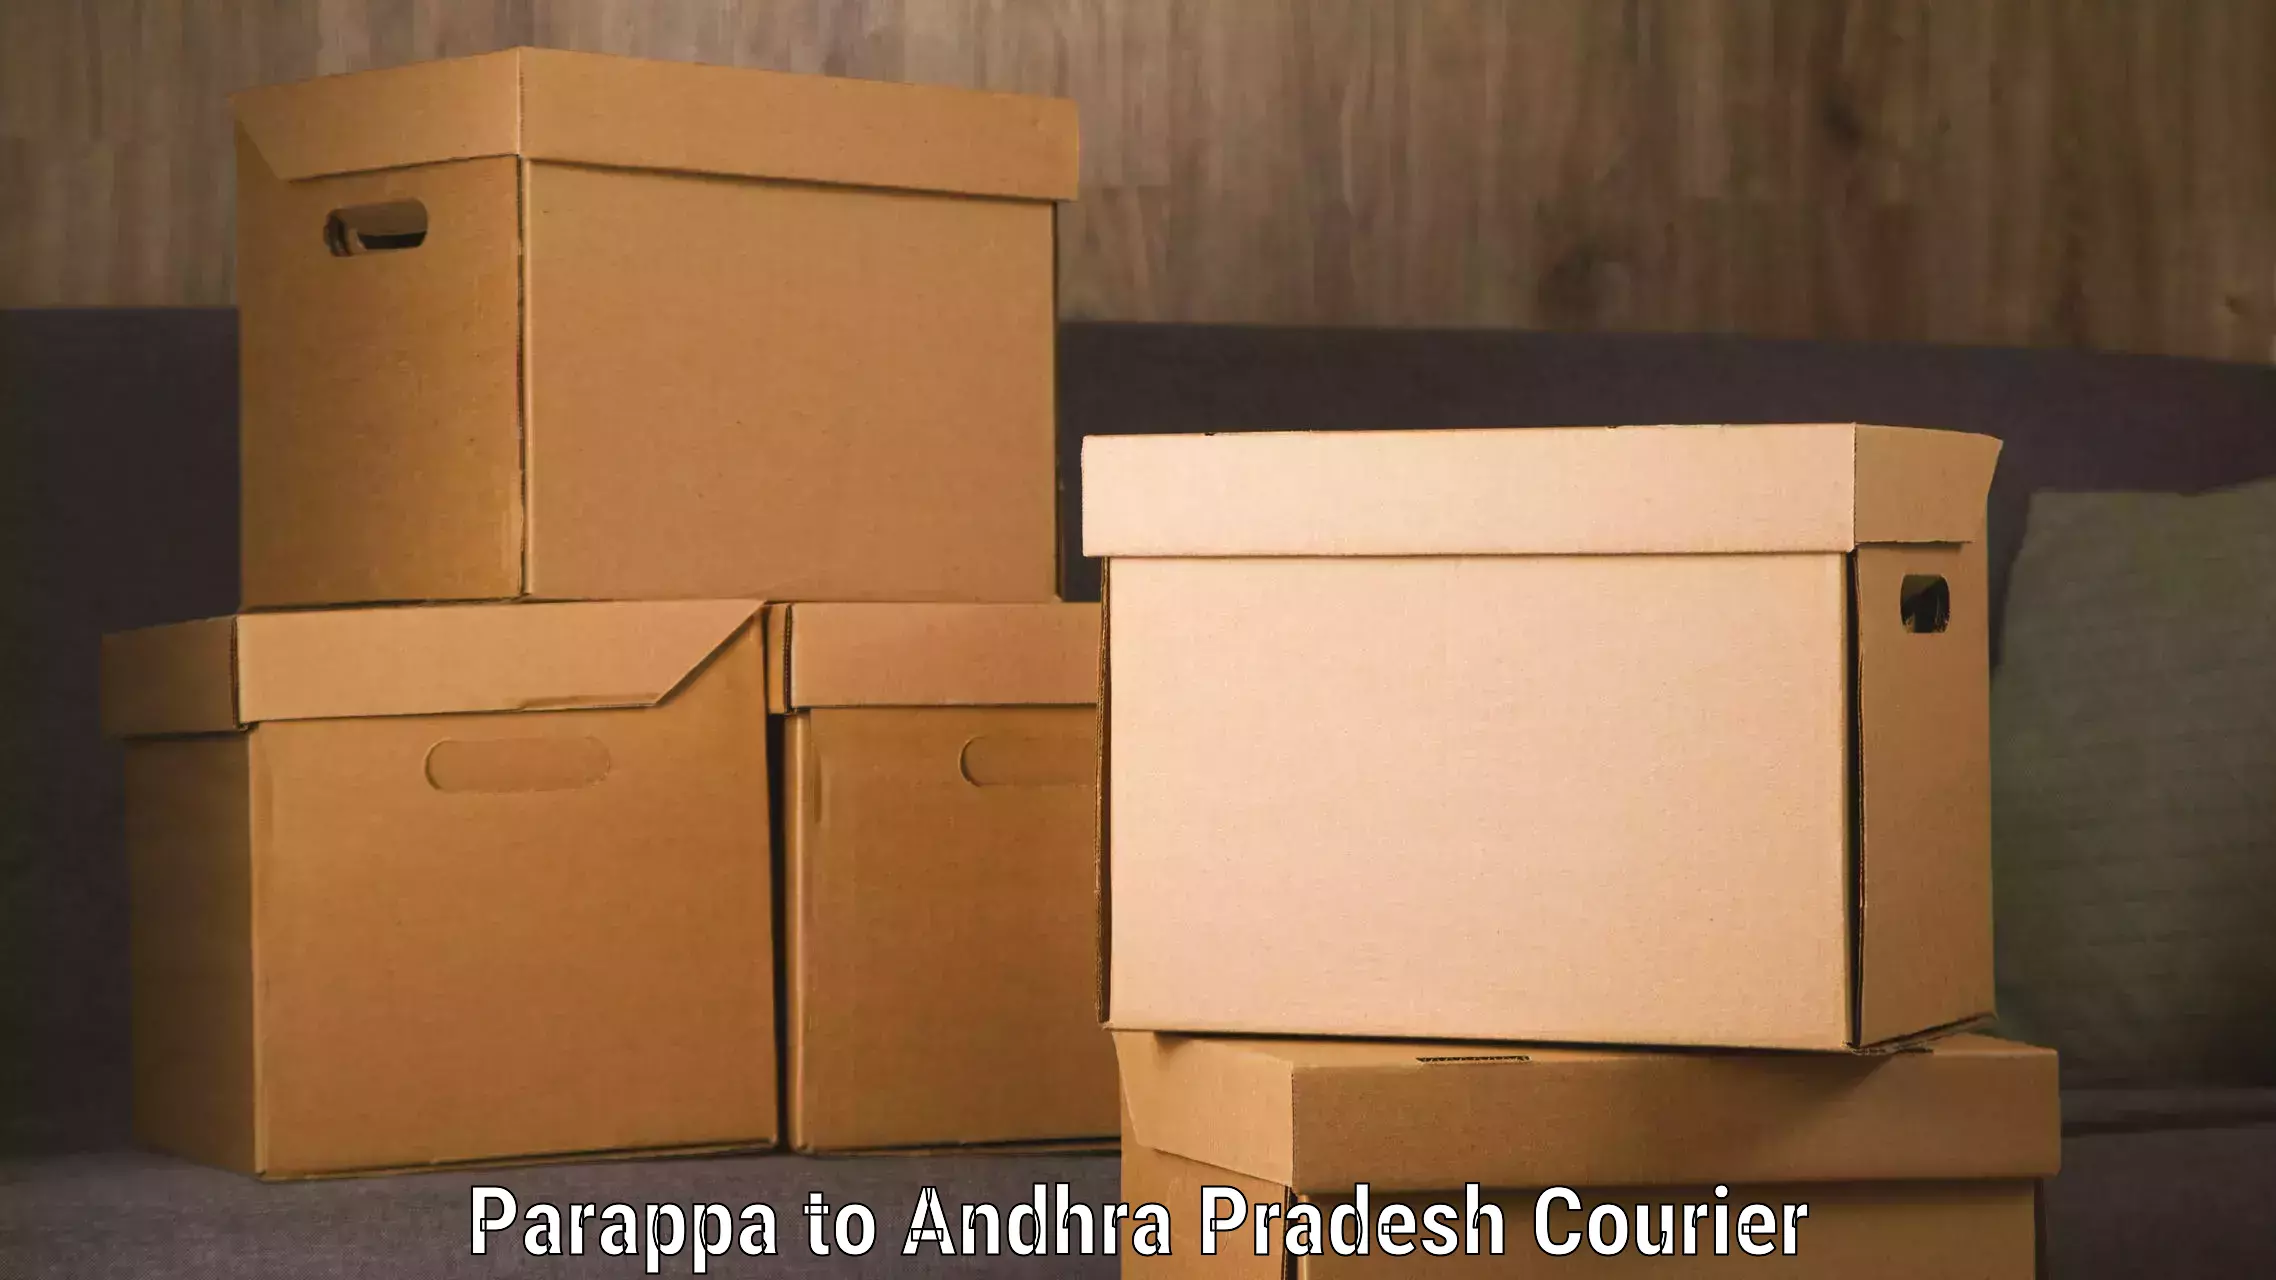 Long distance courier Parappa to Visakhapatnam Port